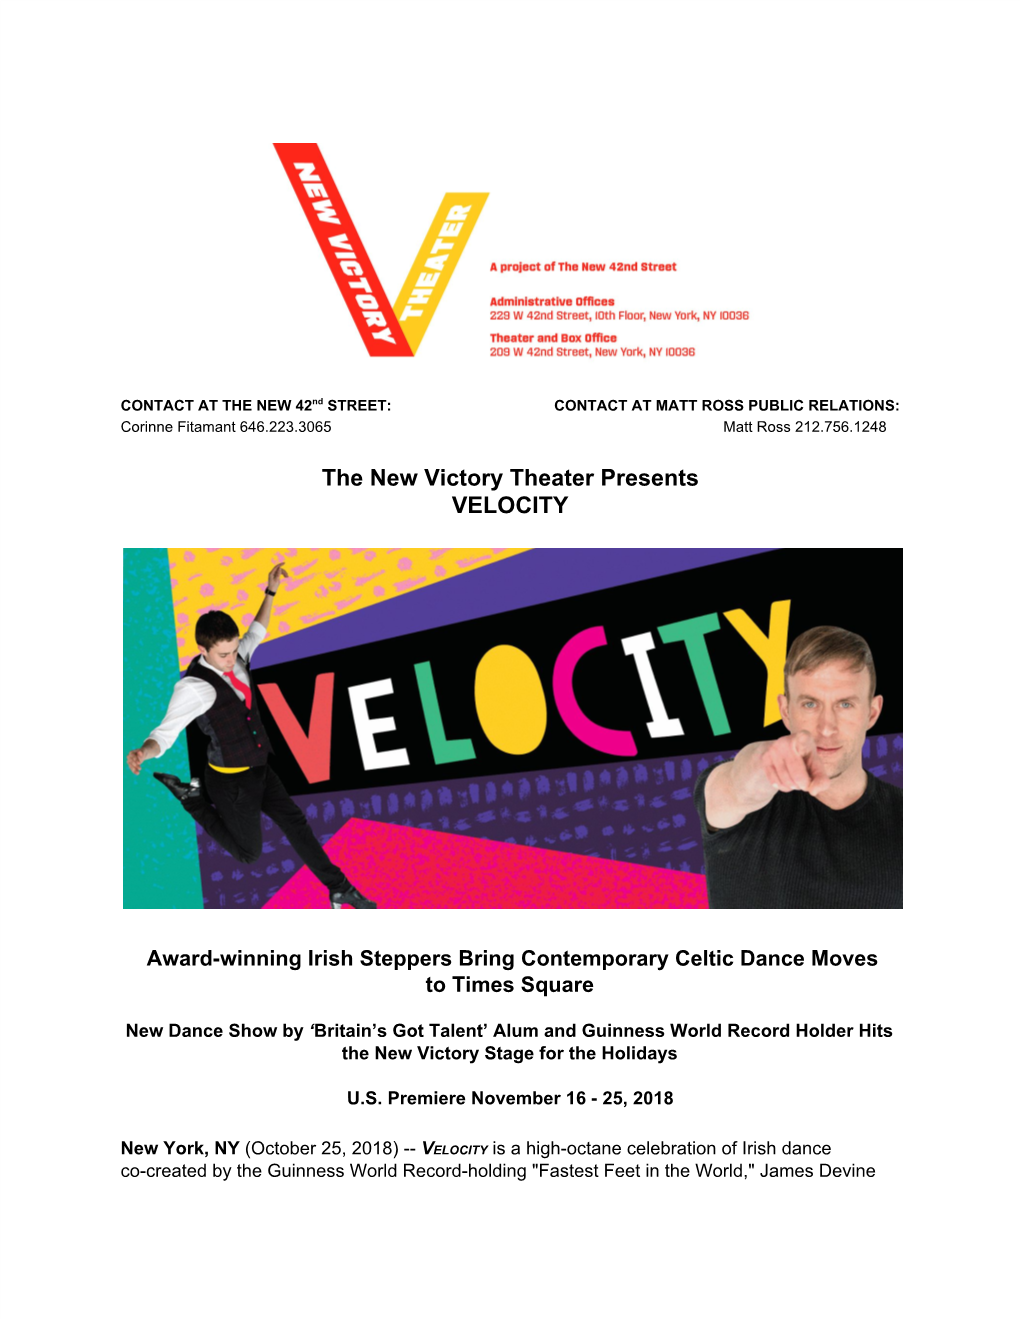 The New Victory Theater Presents VELOCITY